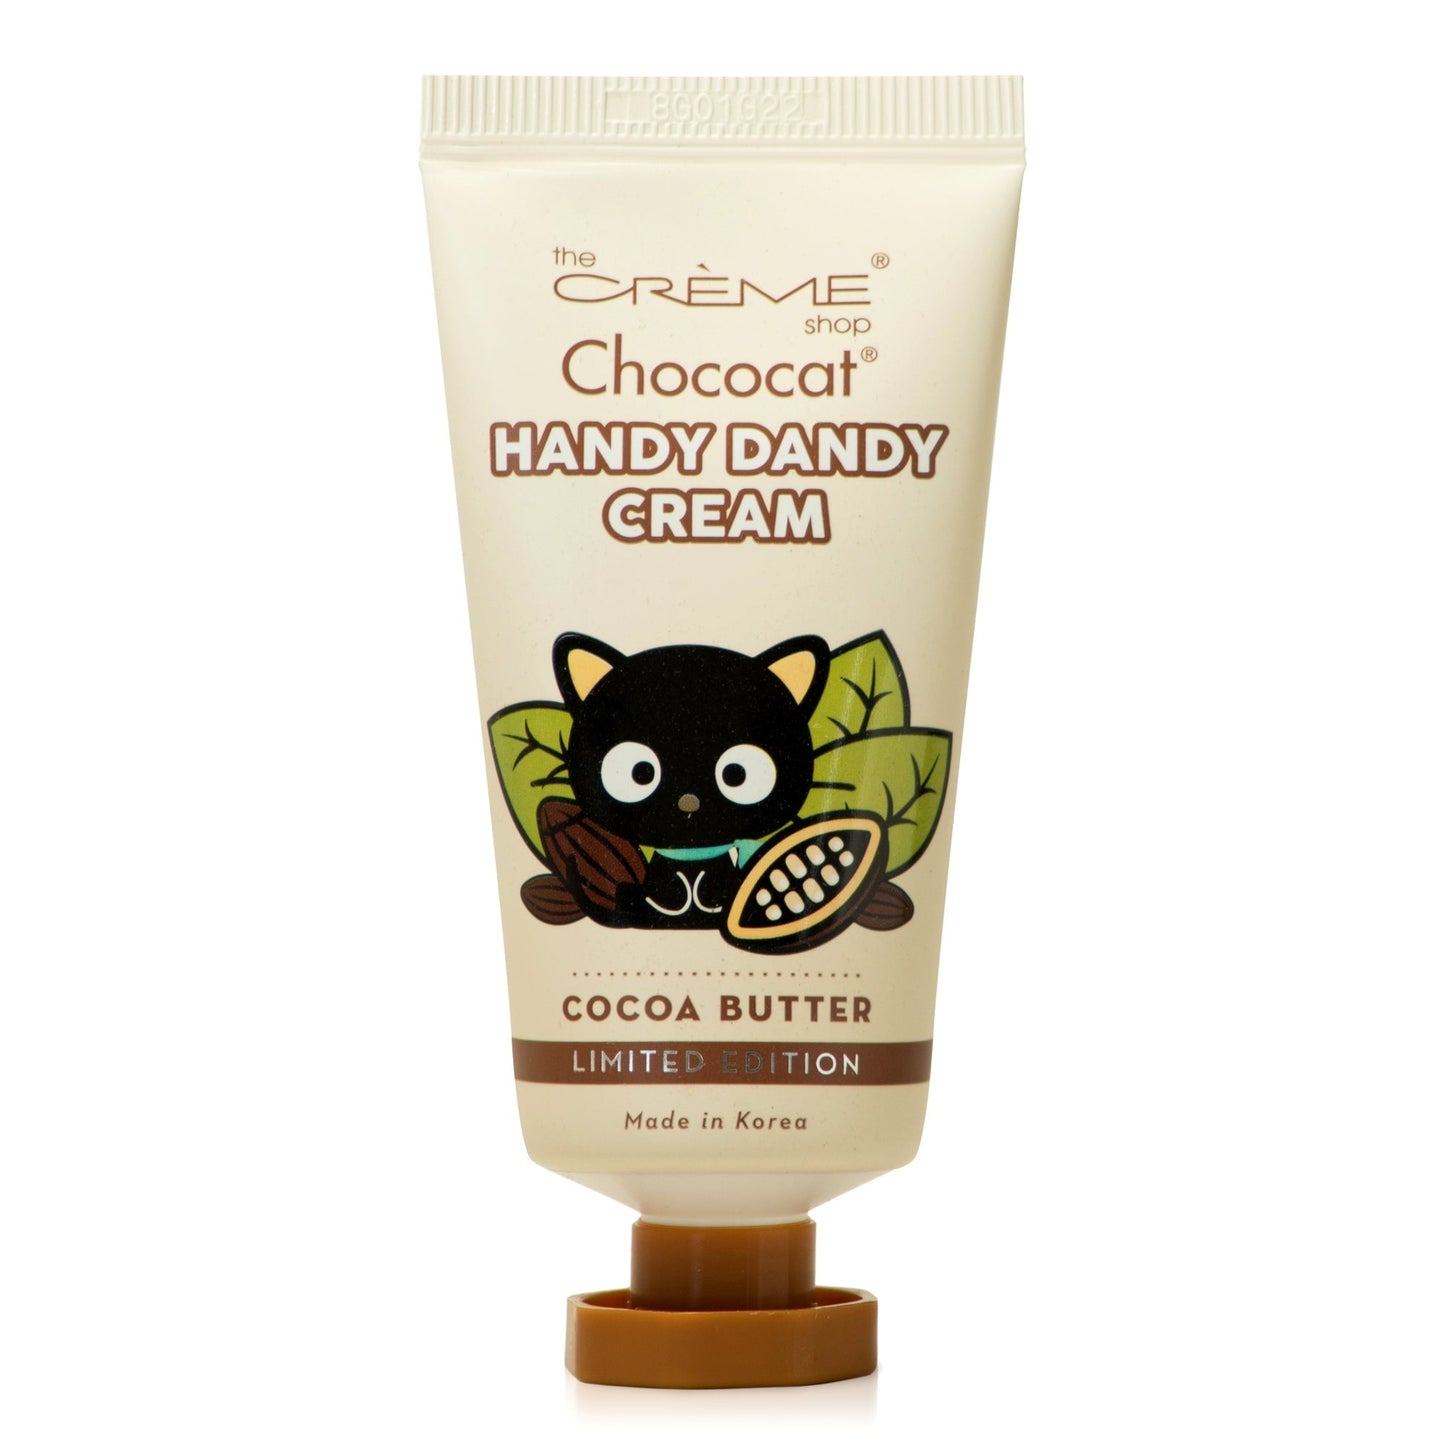 Hello Kitty and Friends - Holiday Handy Dandy Creme Set Hand Creams The Crème Shop x Sanrio 